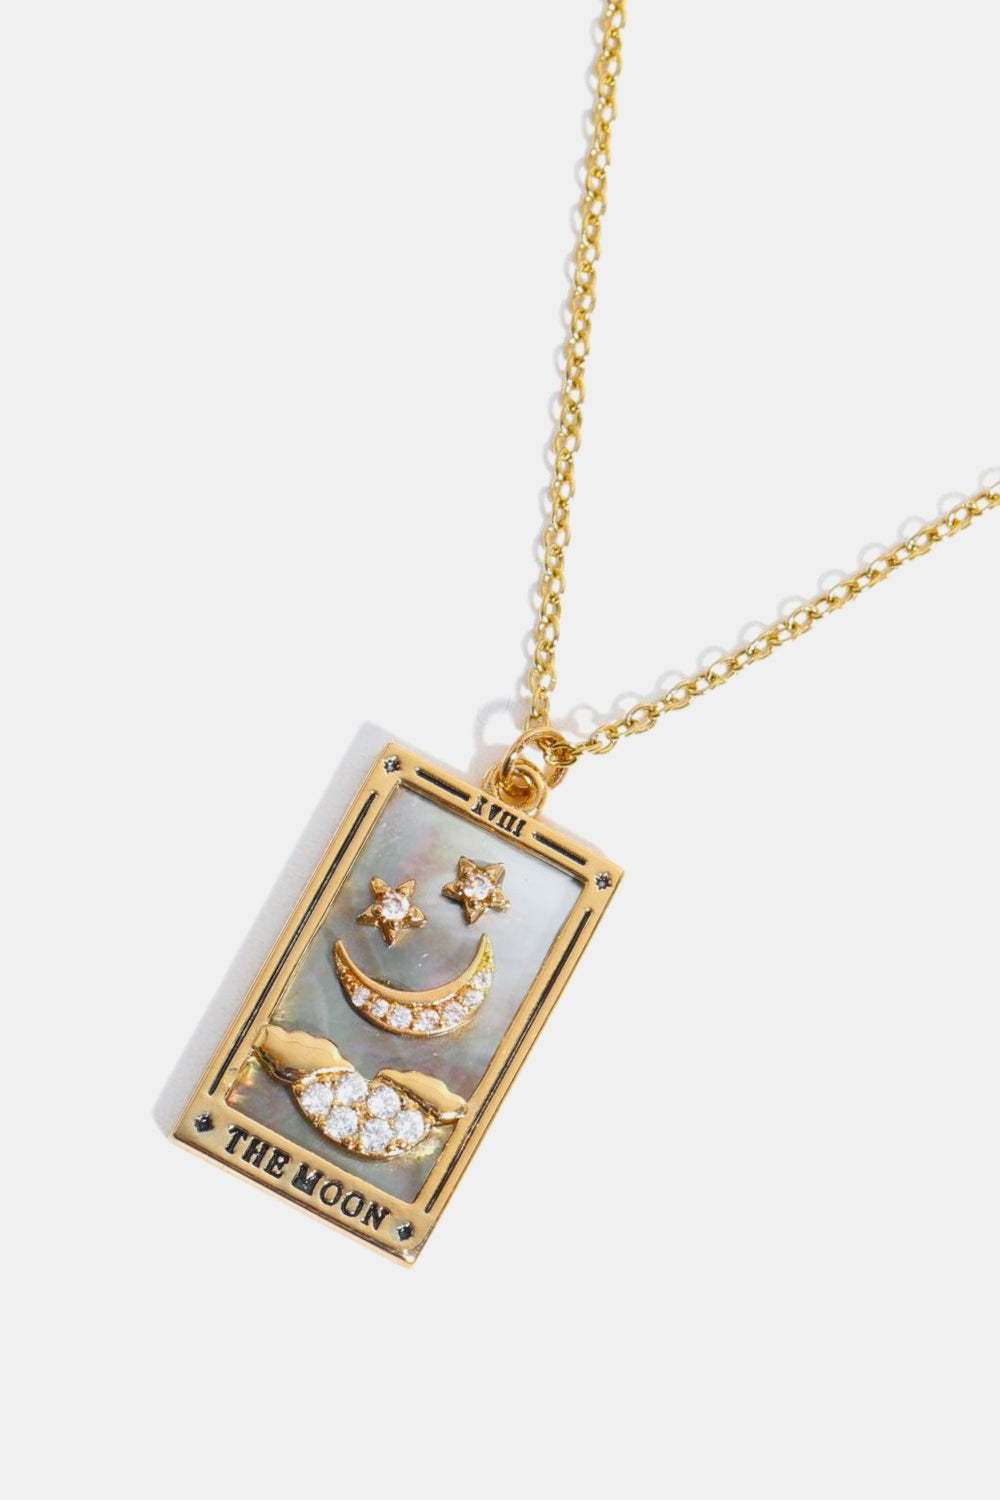 Trendsi Cupid Beauty Supplies Women Necklace Tarot Card Pendant Stainless Steel Necklace